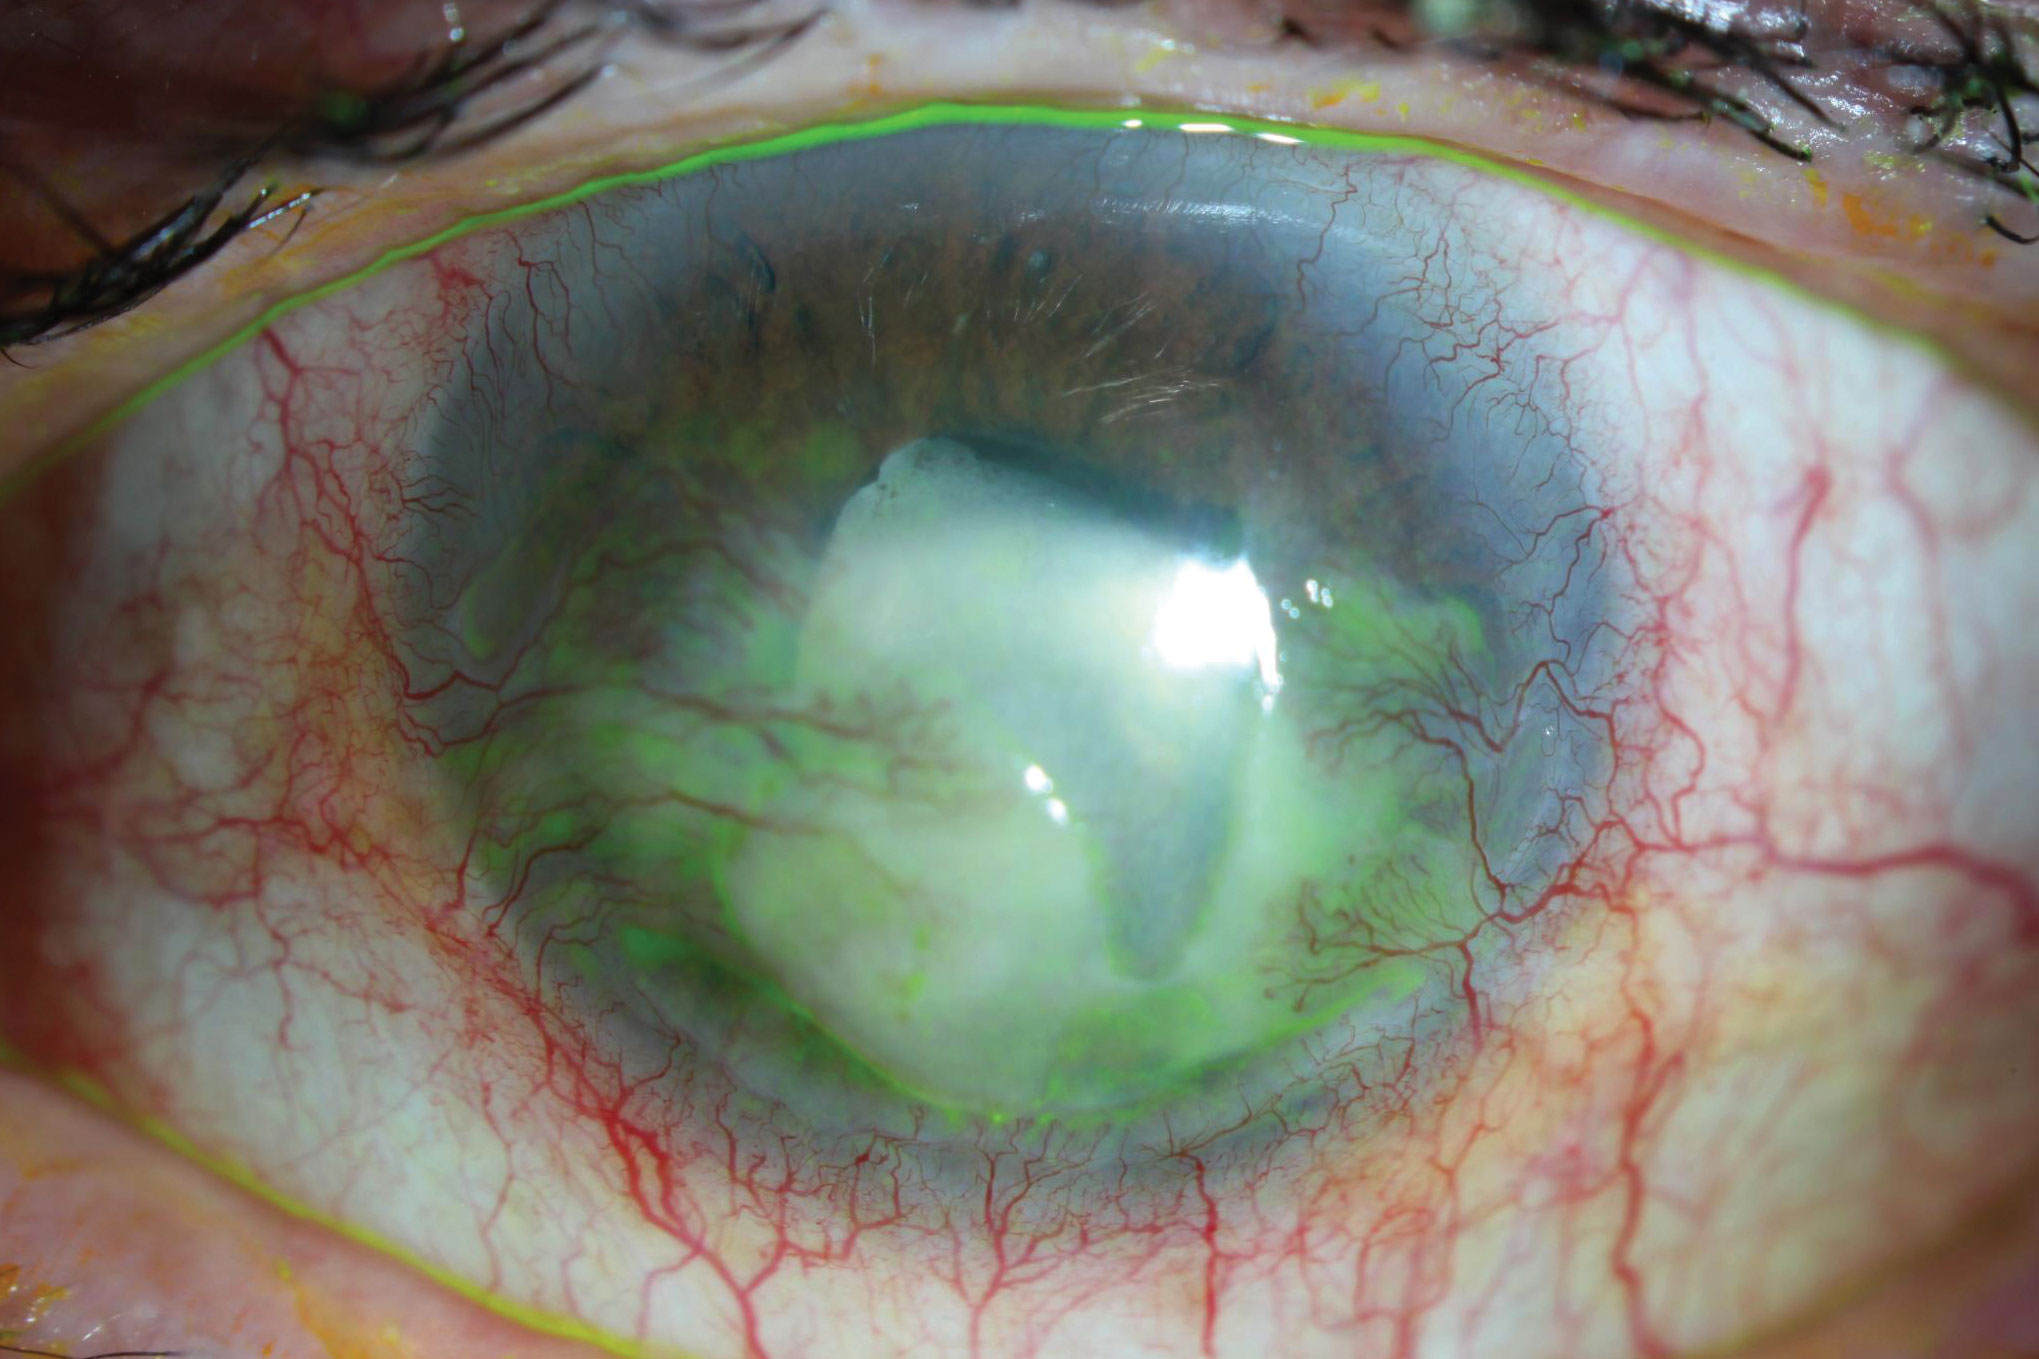 This is the patient from Figure 1. After years of dealing with unremitting zoster-related inflammation, iritis and neurotrophy, the patient’s cornea opacified and vascularized, and the pupil became irregular and non-responsive. His case illustrates the potentially catastrophic impact of HZO on the visual system.